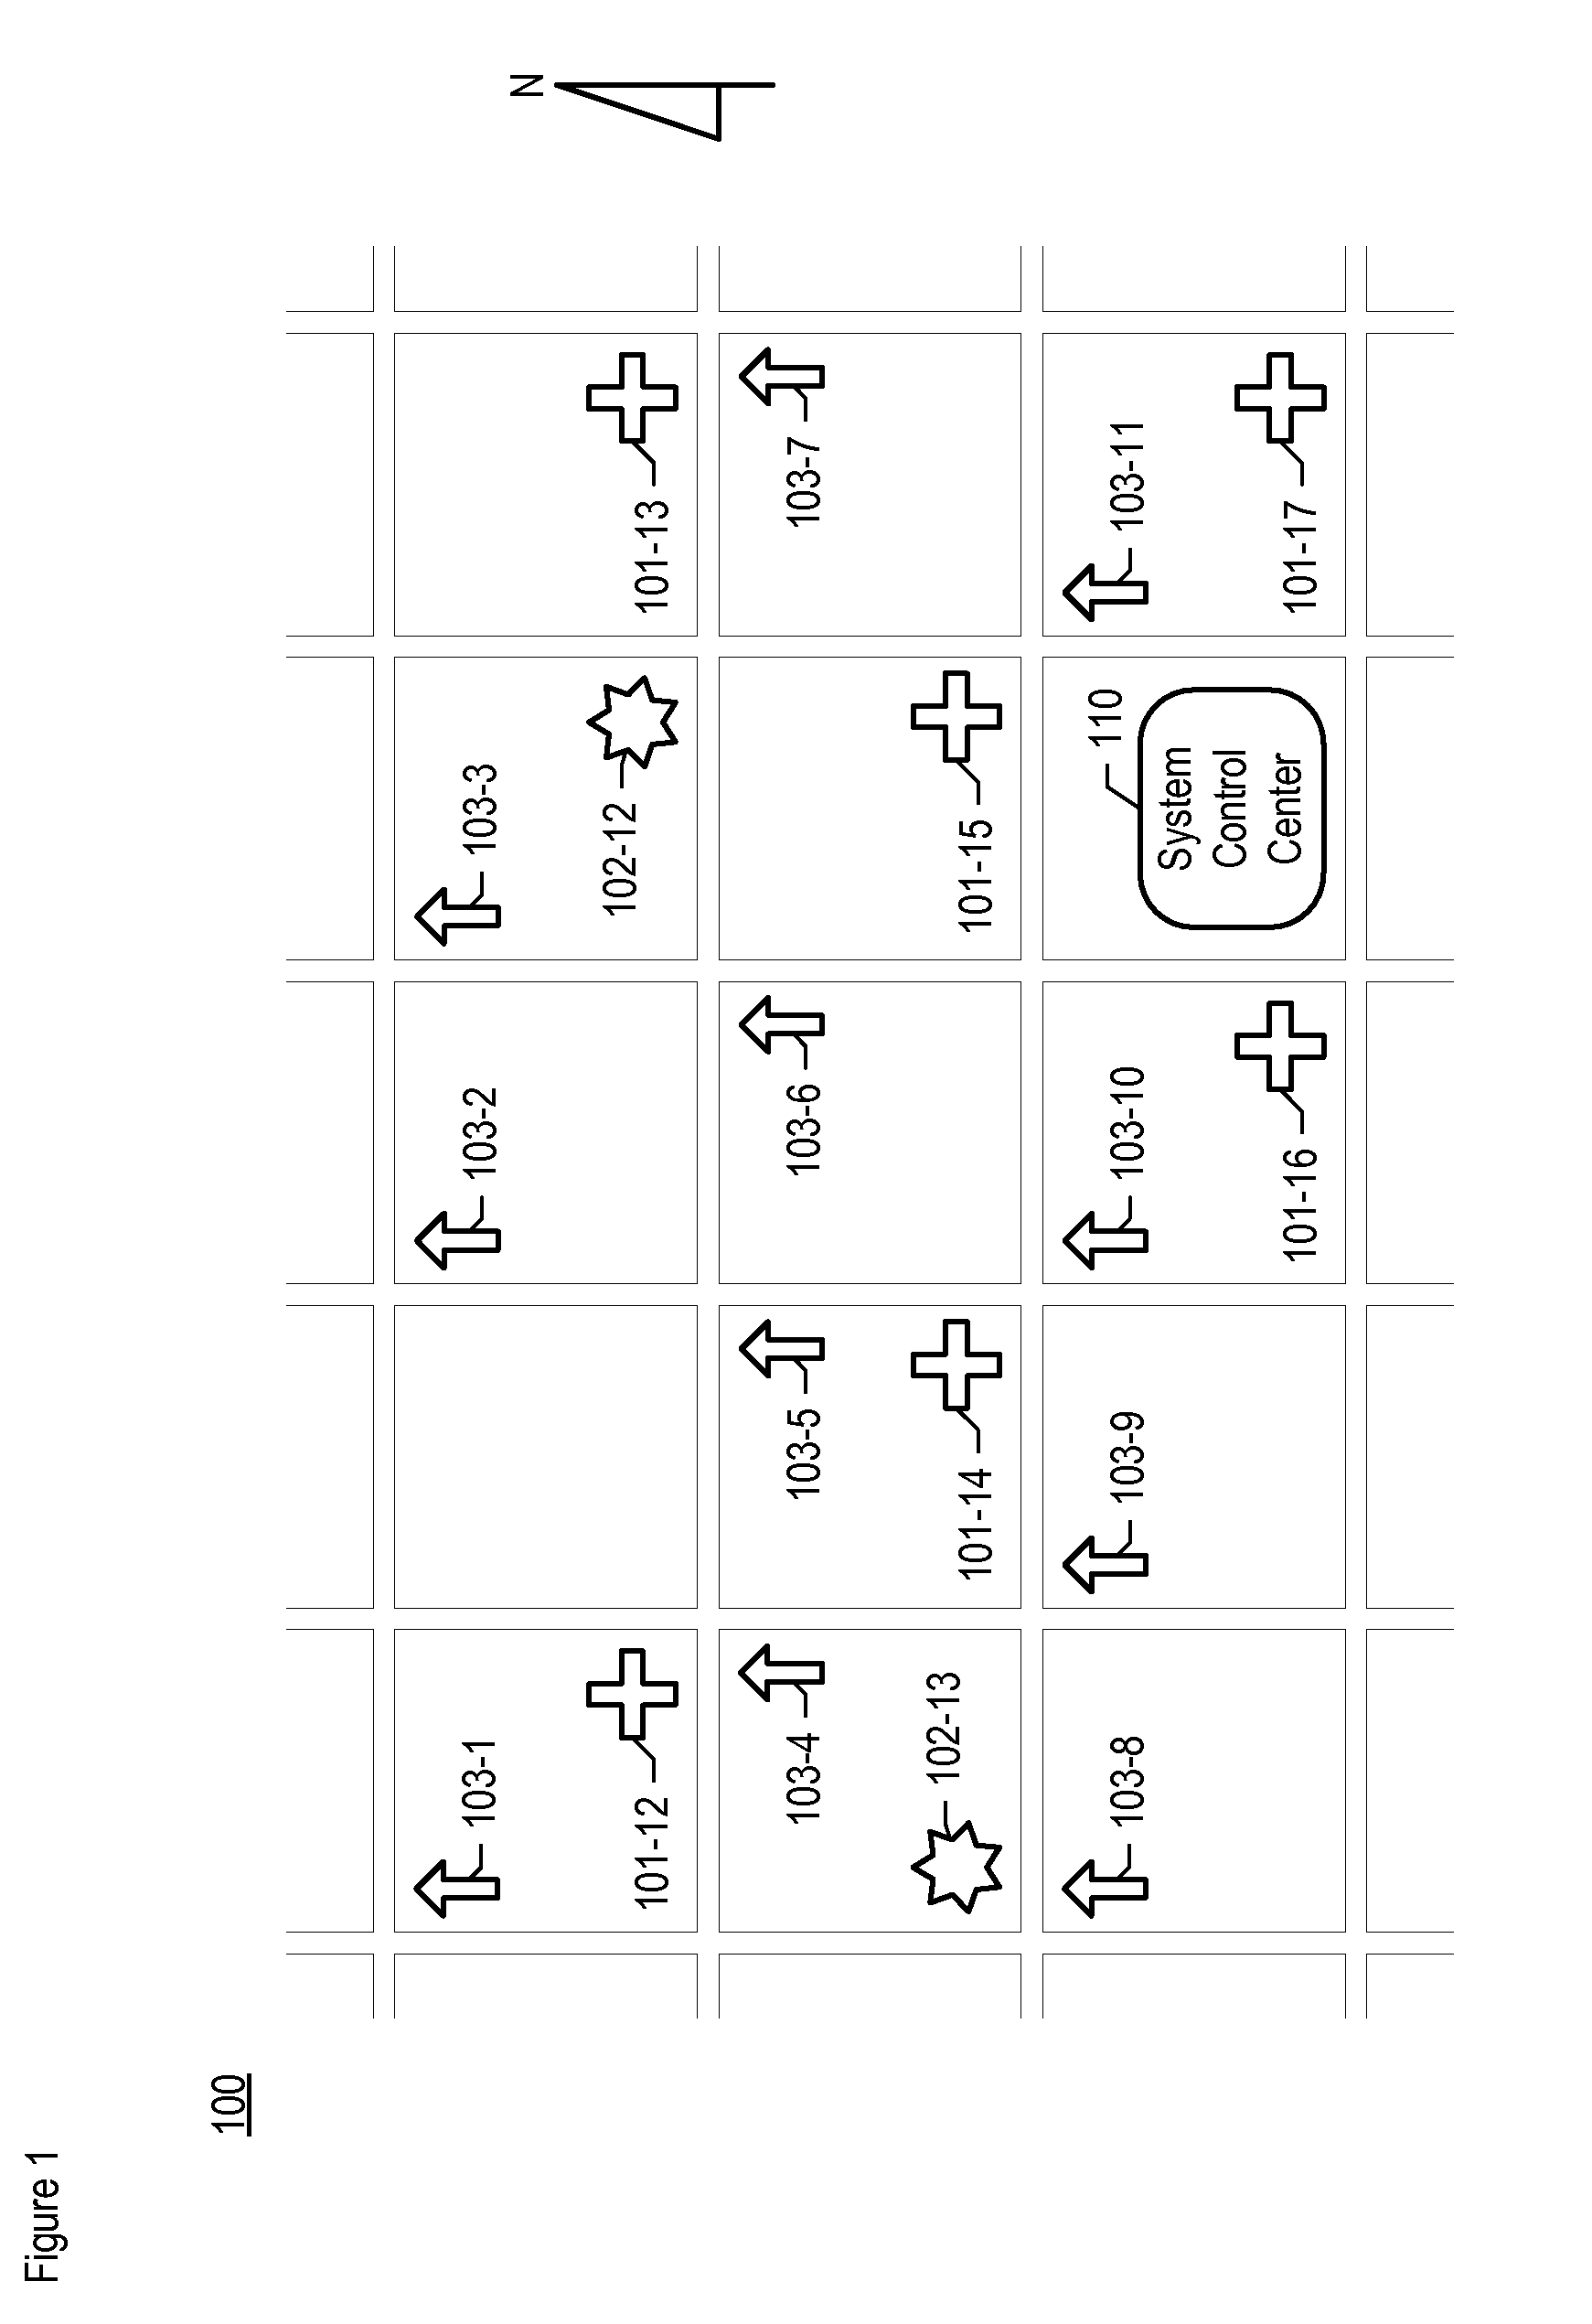 Chemical, biological, radiological, and nuclear weapon detection system comprising array of spatially-disparate sensors and environmental acuity